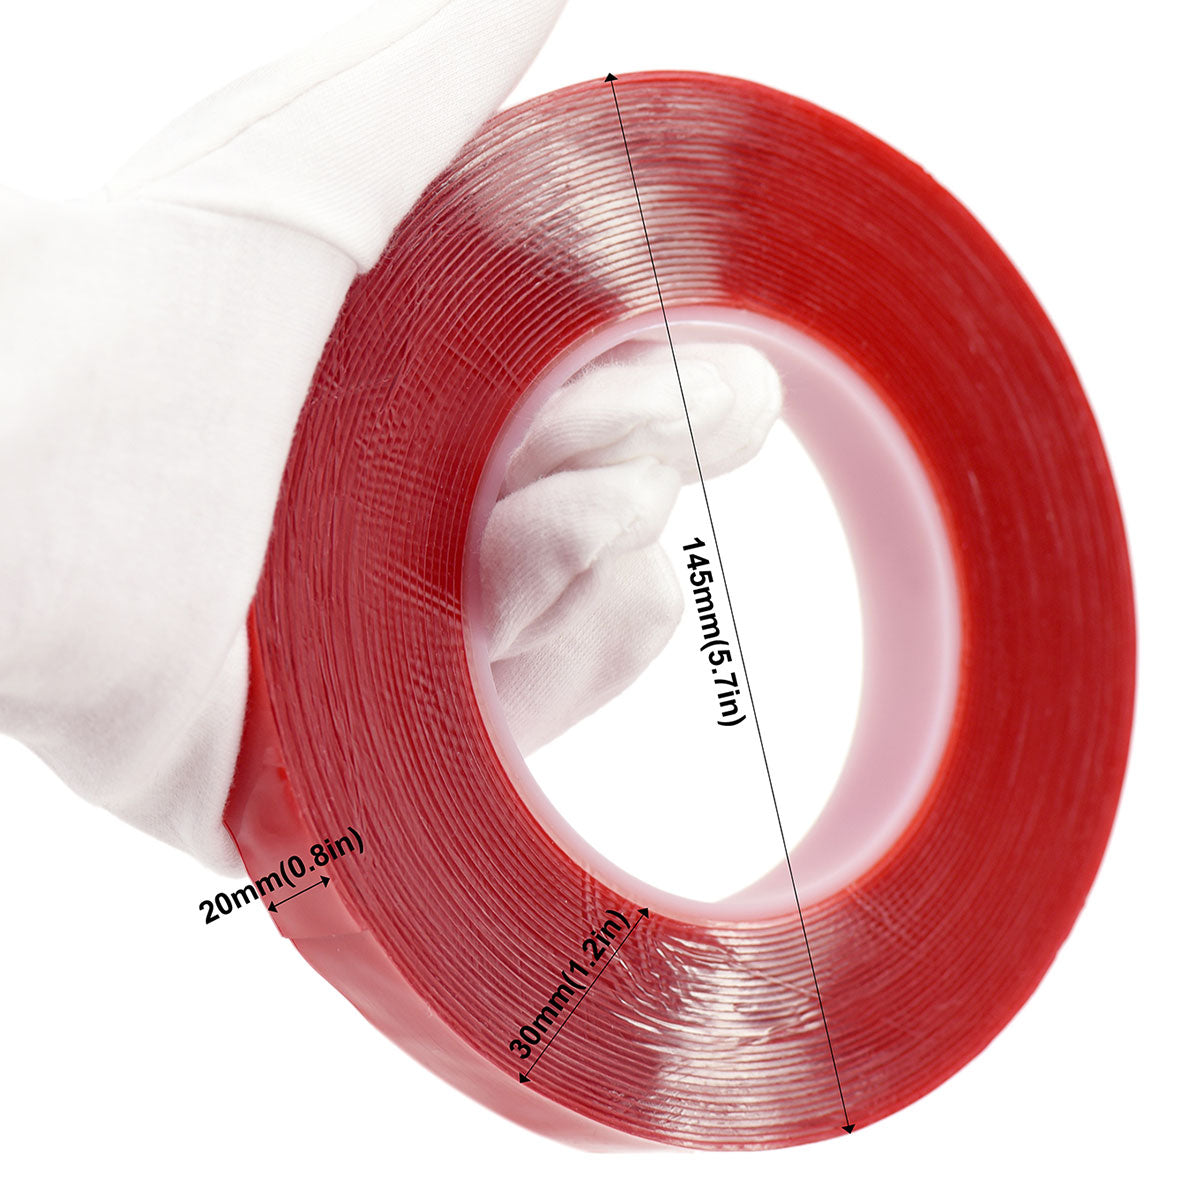 20mm x 1mm x 10 meters Multi-Purpose High Strength Transparent Acrylic Gel Adhesive Double Sided Tape Roll No Residue